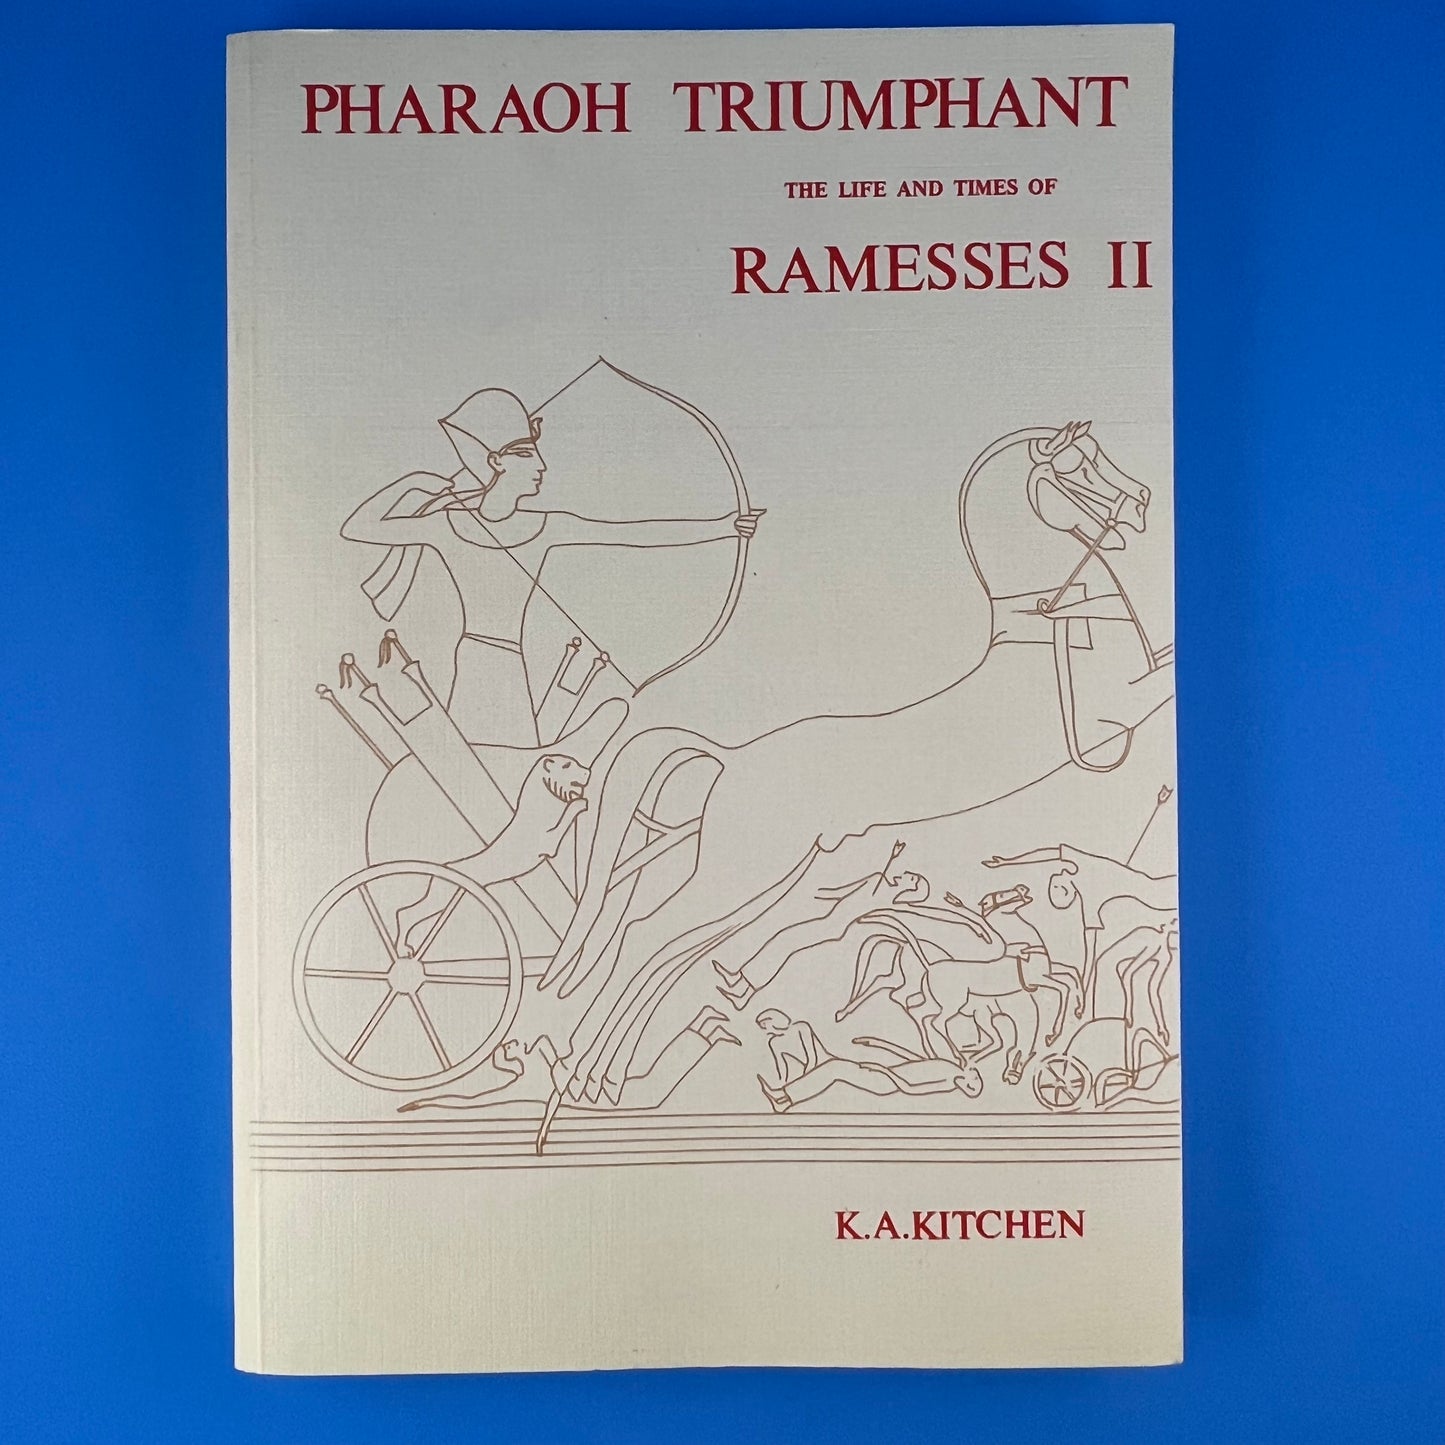 Pharaoh Triumphant: The Life and Times of Ramesses II